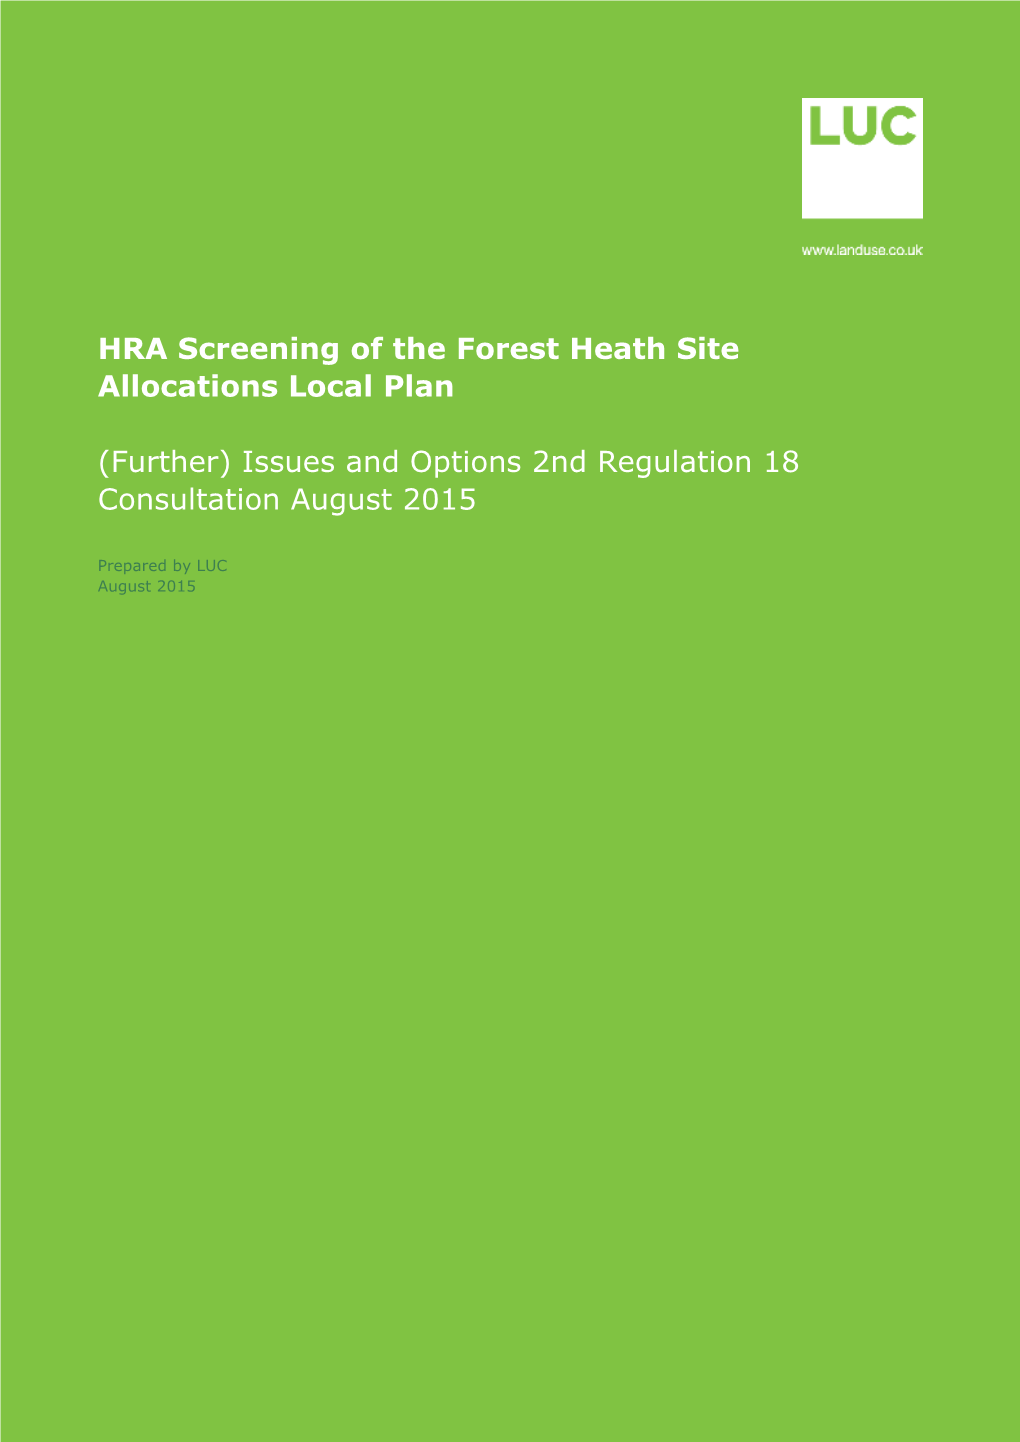 HRA Screening of the Forest Heath Site Allocations Local Plan